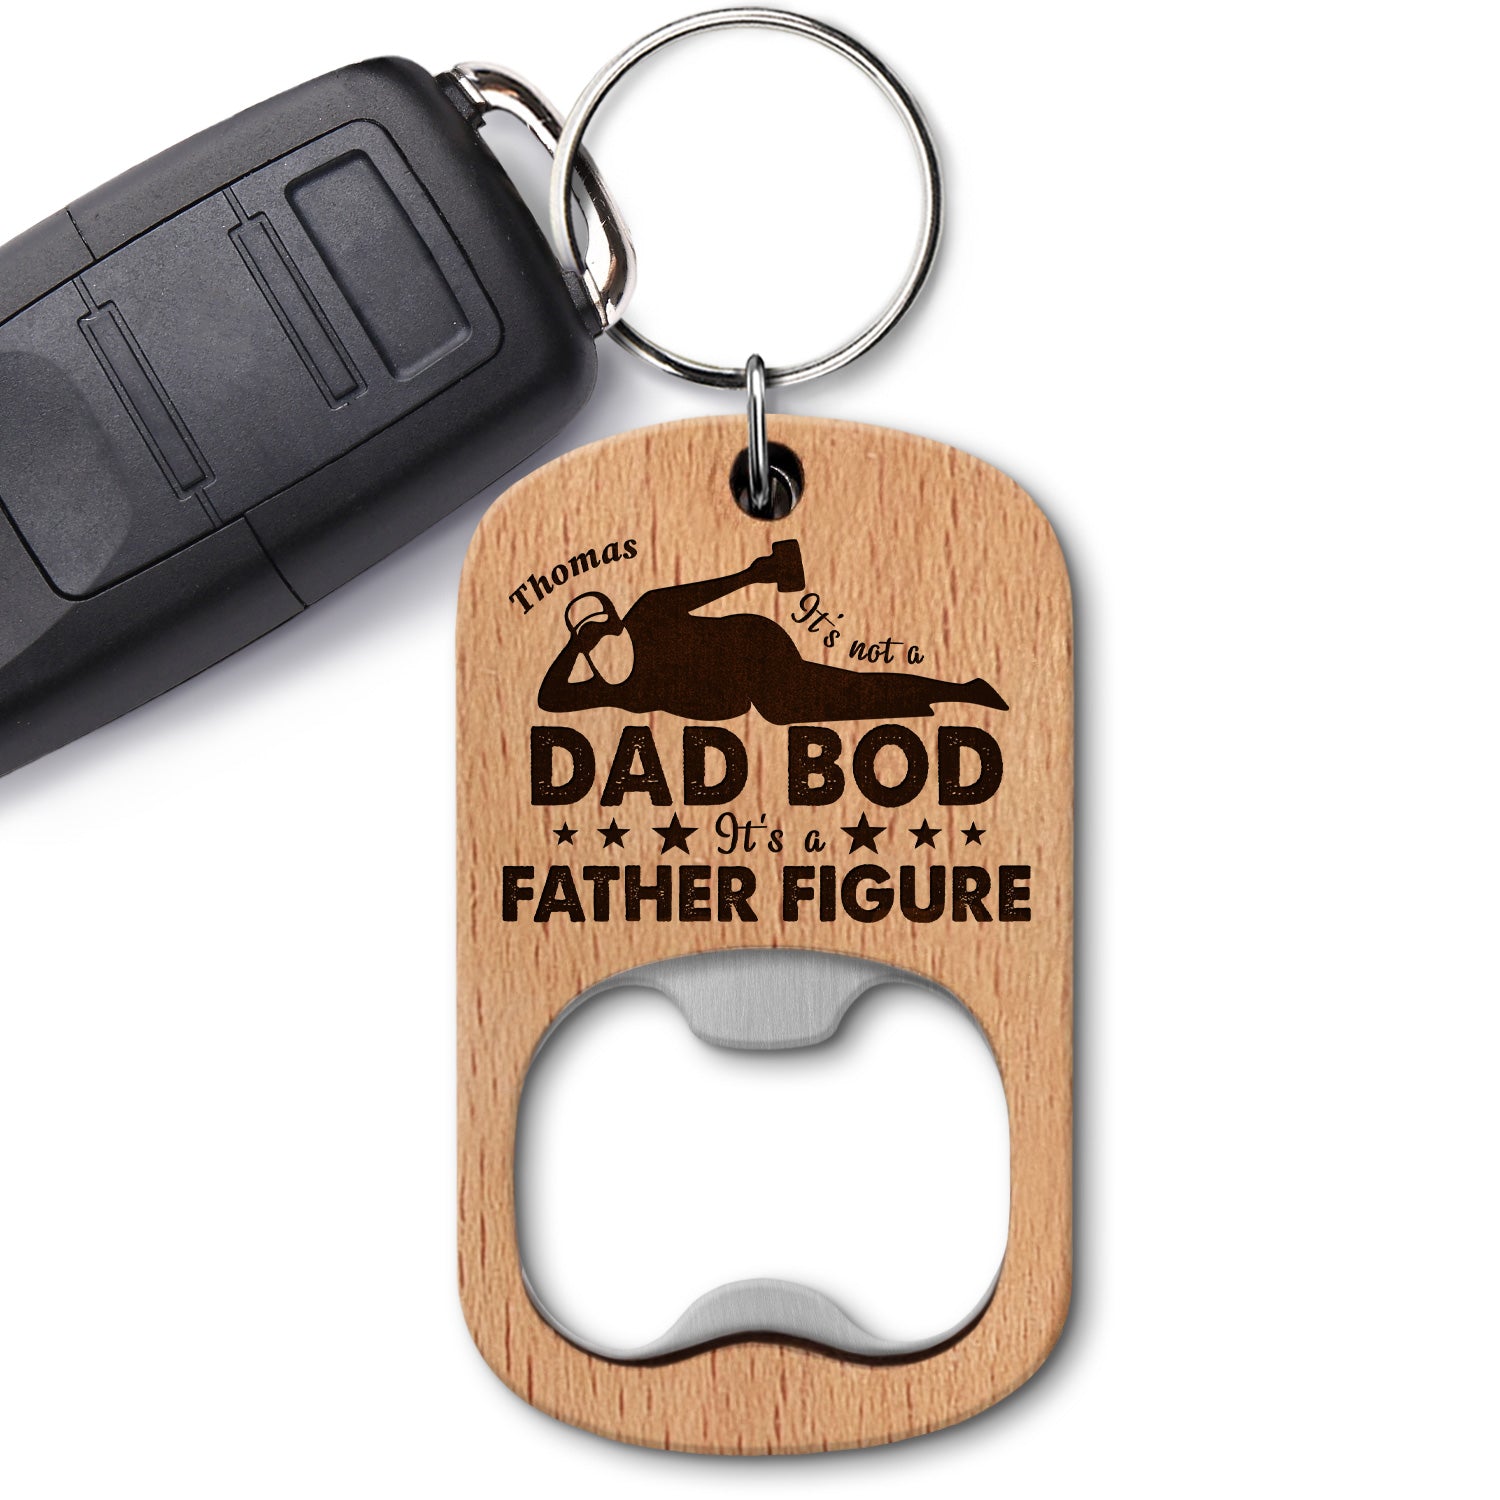 It's Not A Dad Bod - Gift For Father, Daddy, Papa, Uncle - Personalized Bottle Opener Keychain